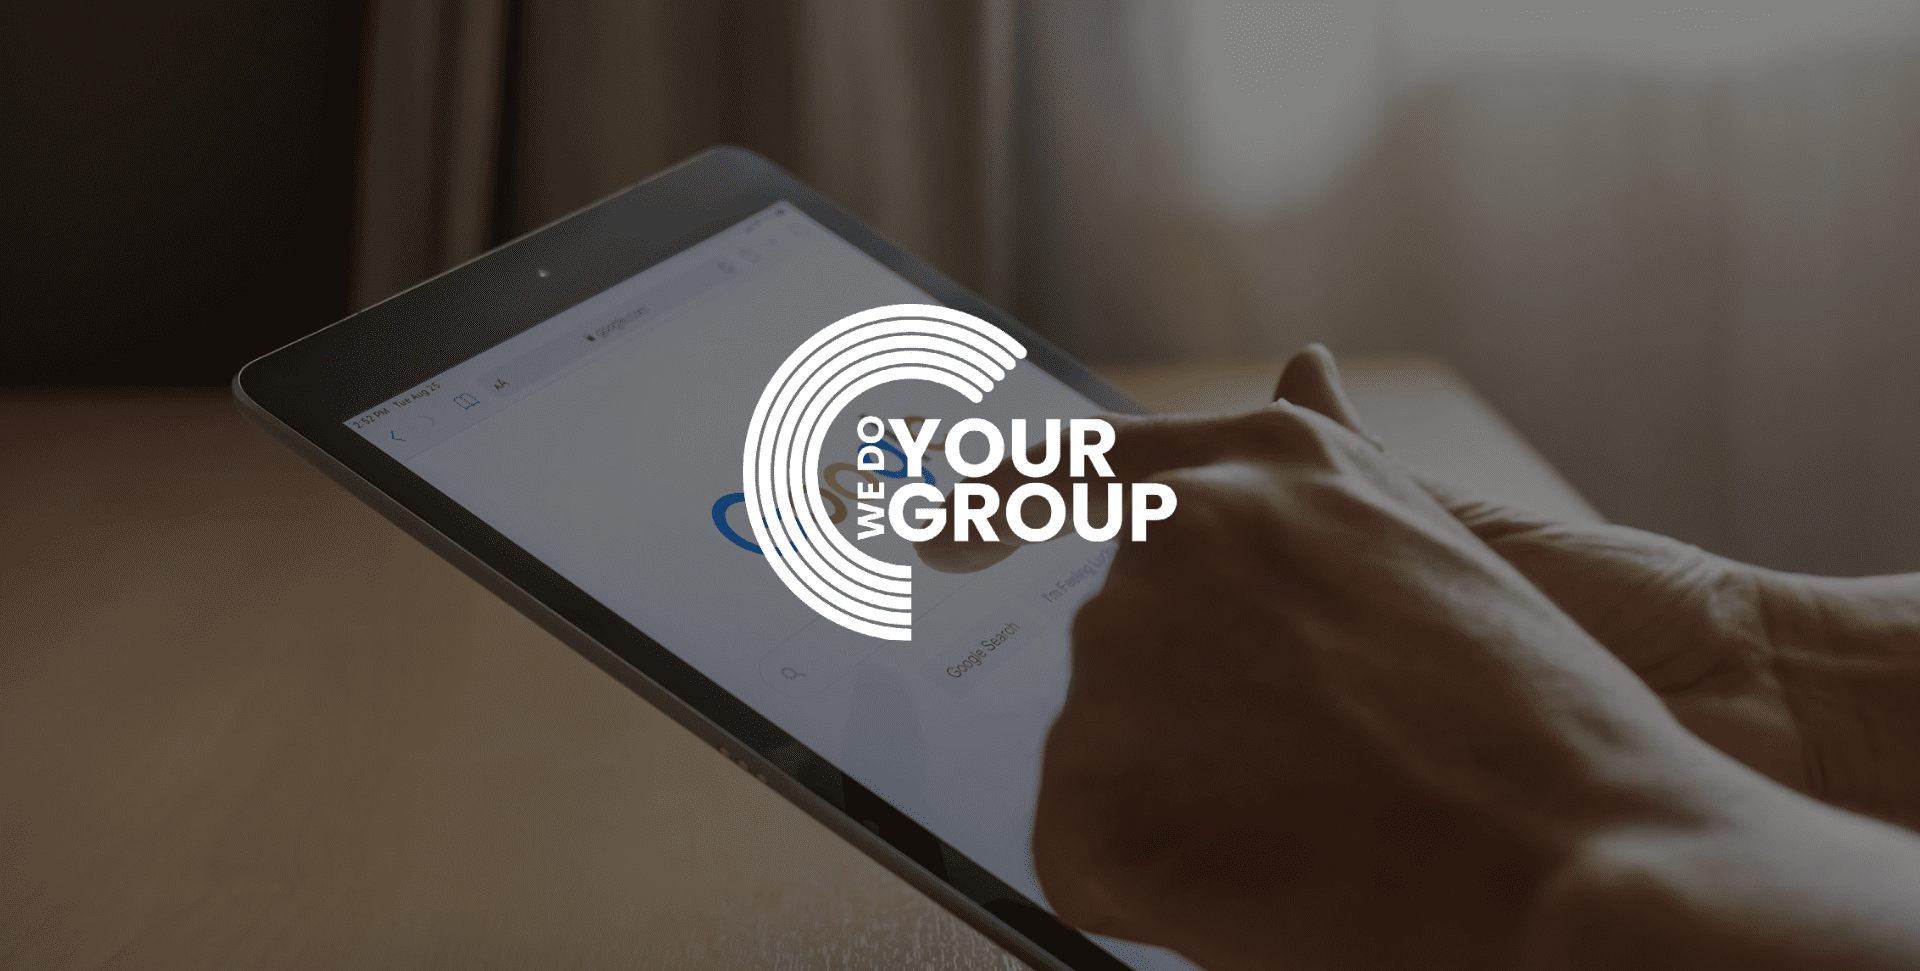 WeDoYourGroup white logo on background with person on their iPad with Google open on the screen